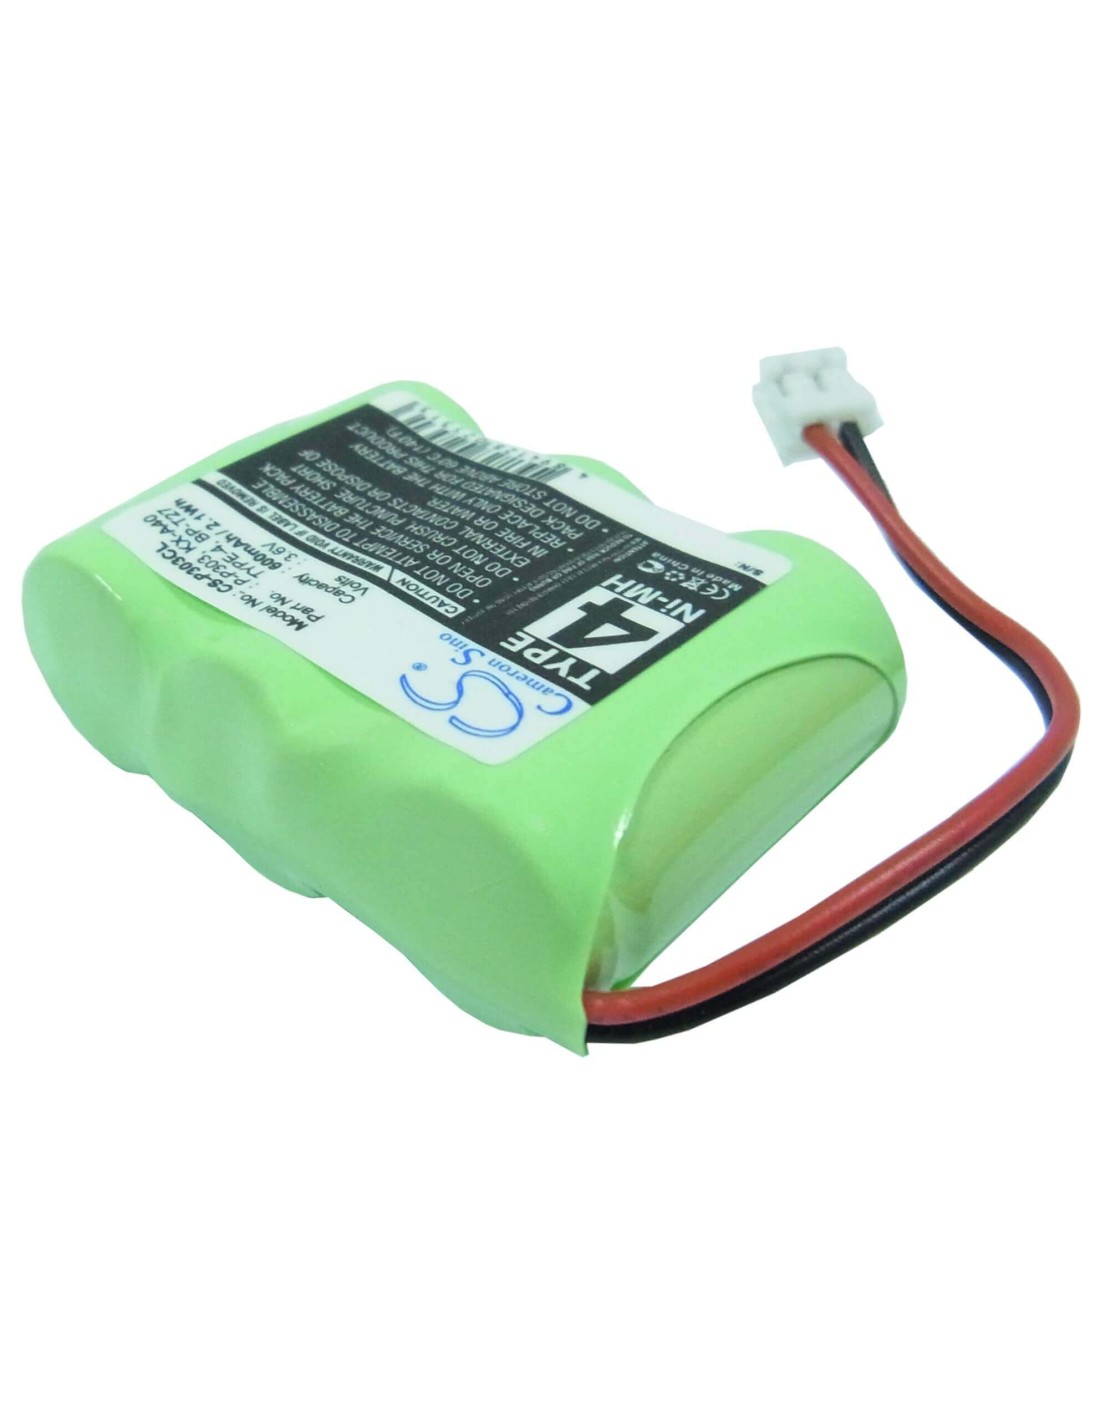 Battery for Code A Phone, 7130 3.6V, 600mAh - 2.16Wh